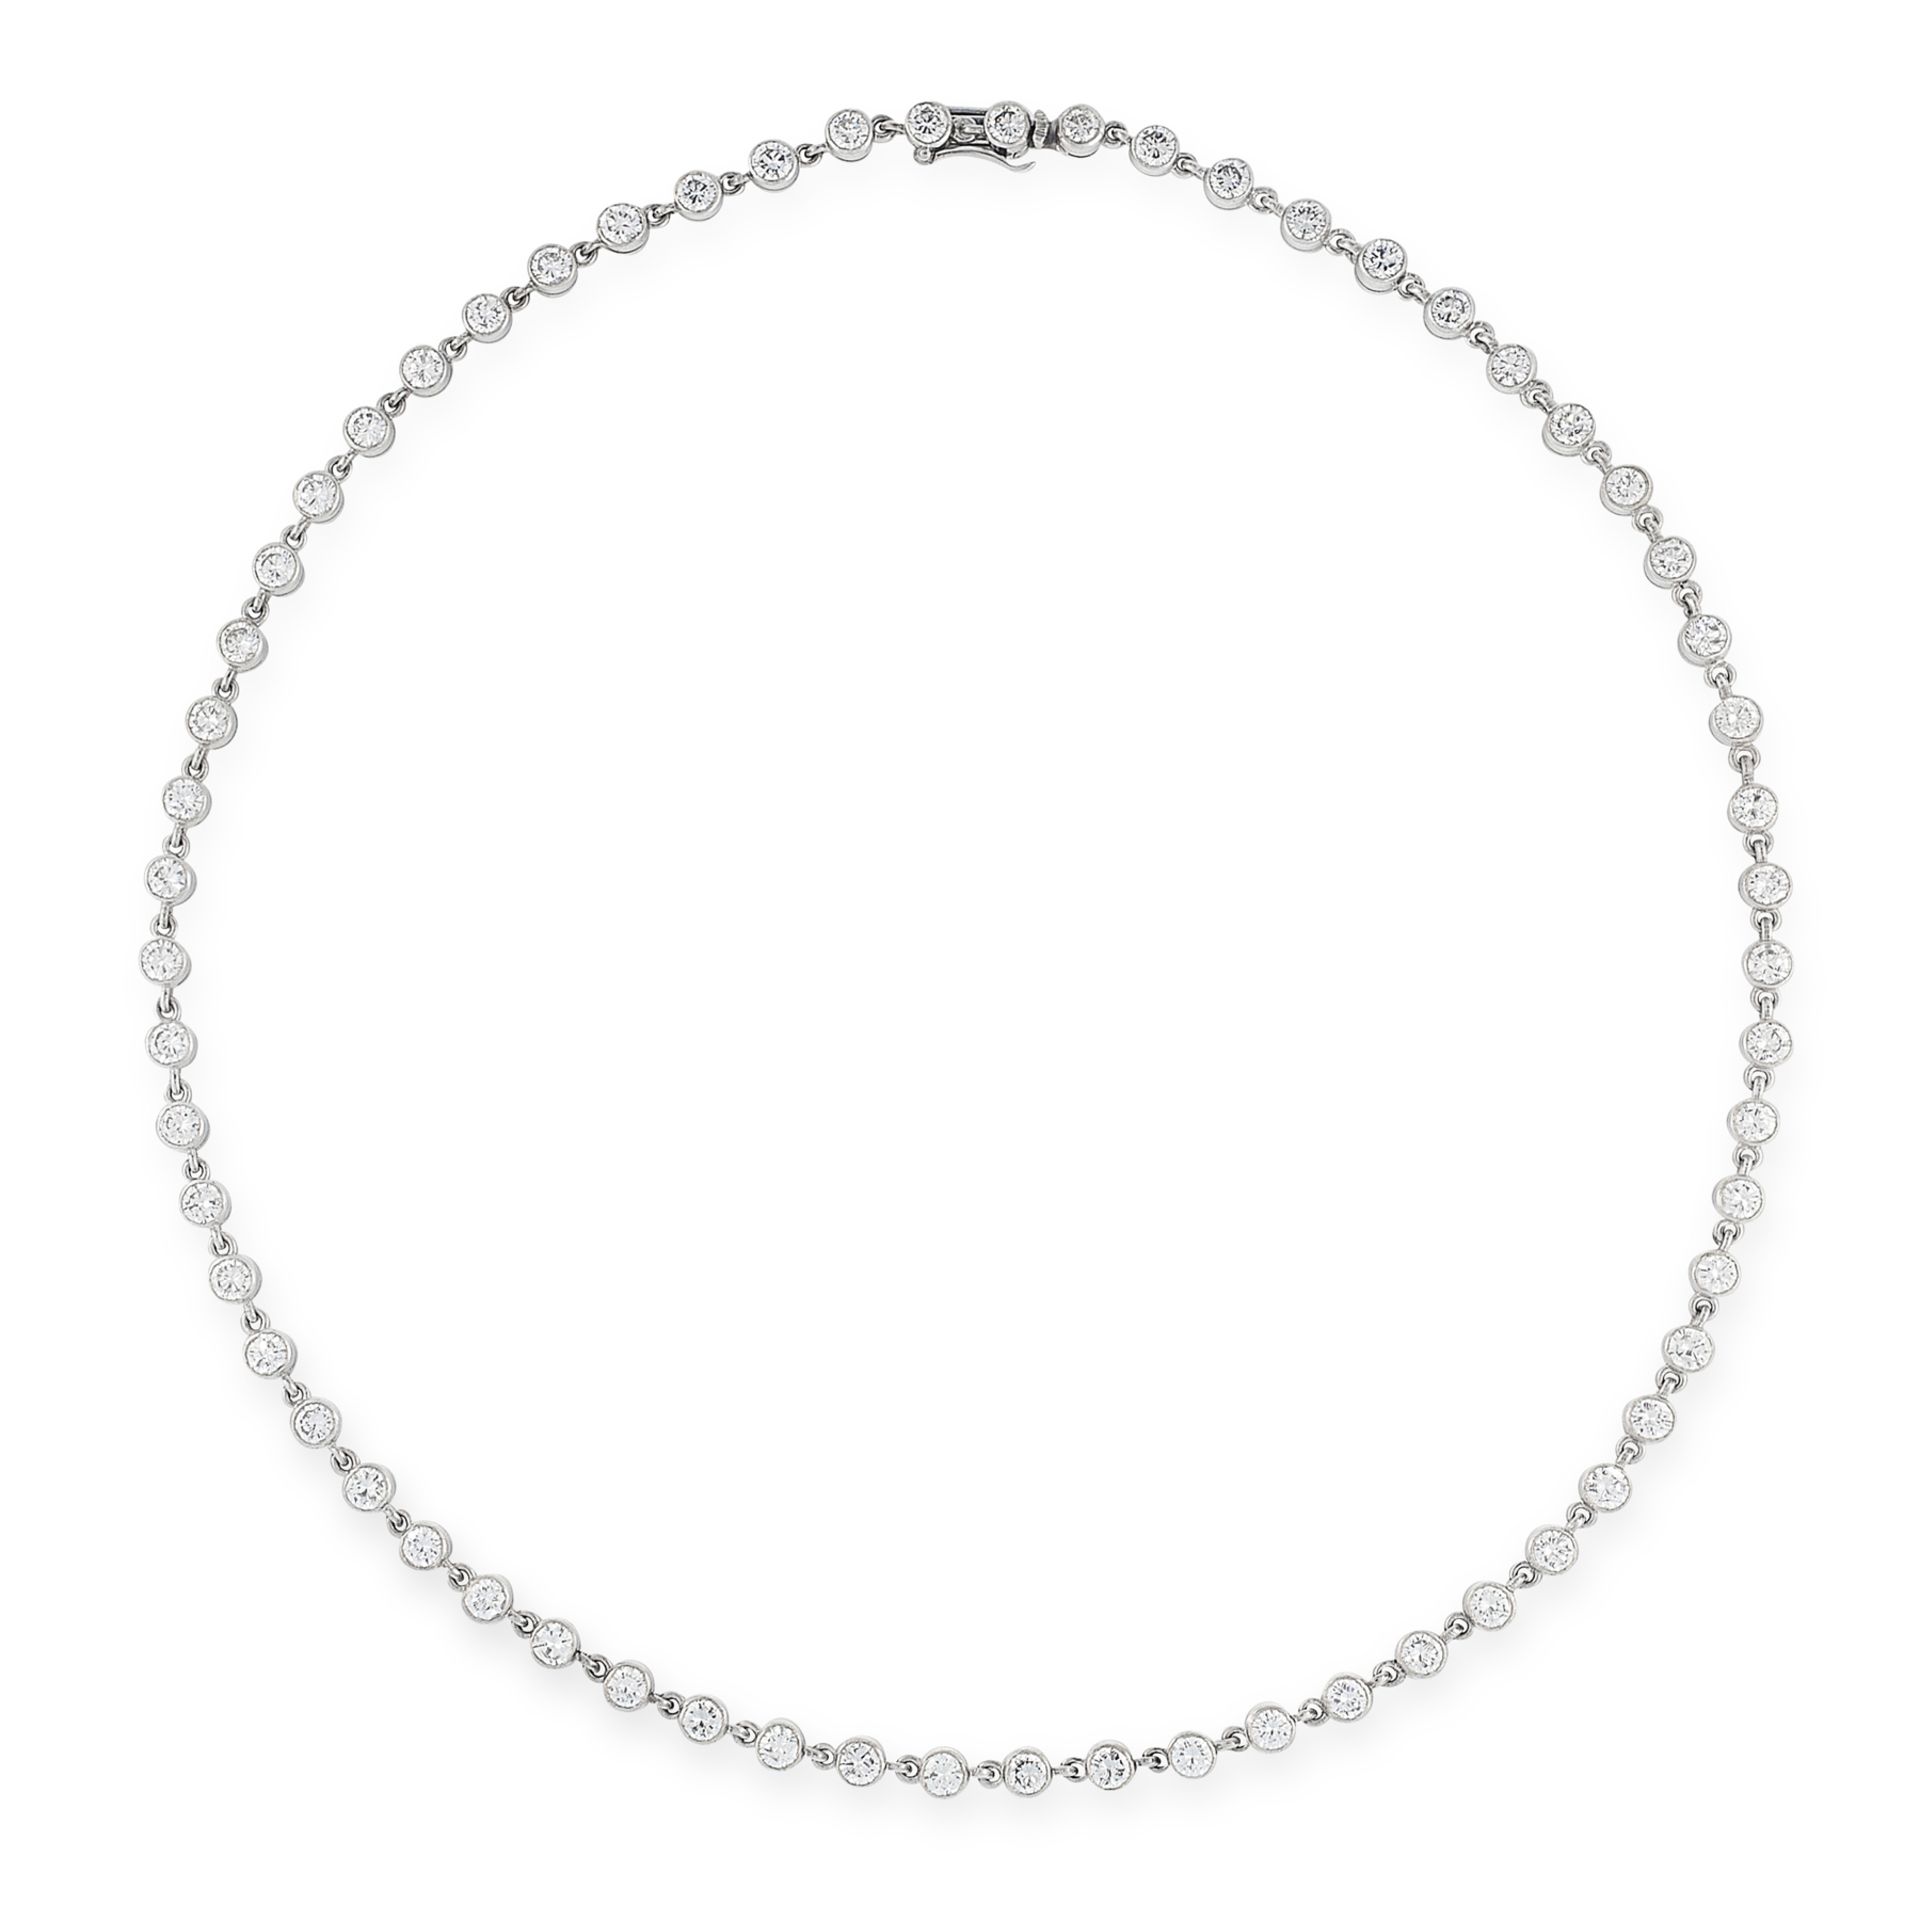 A VINTAGE DIAMOND LINE NECKLACE, CARTIER 1976 in 18ct white gold, comprising a single row of sixty-